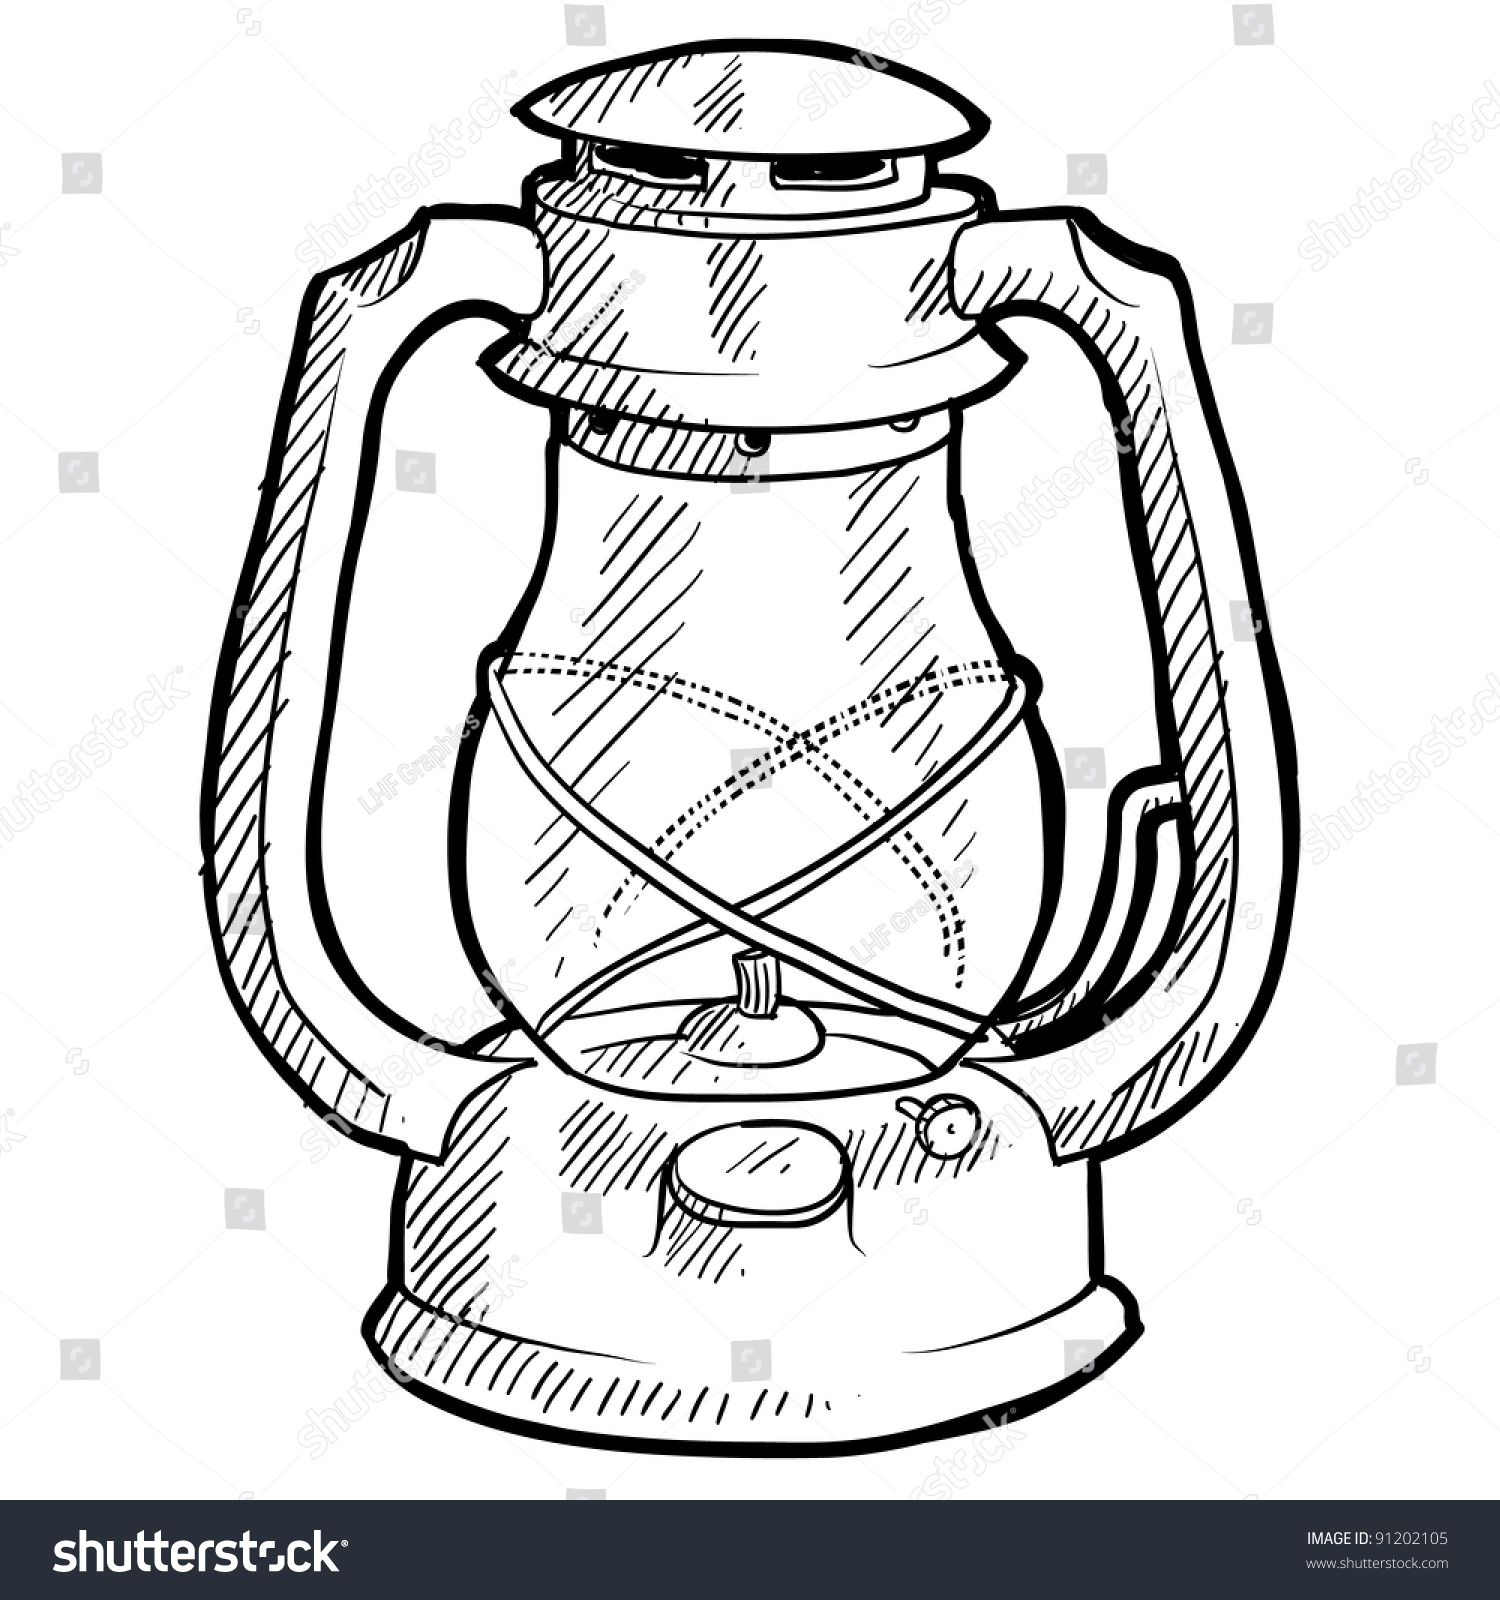 SVG of Doodle style retro camping lantern illustration in vector format suitable for web, print, or advertising use. svg